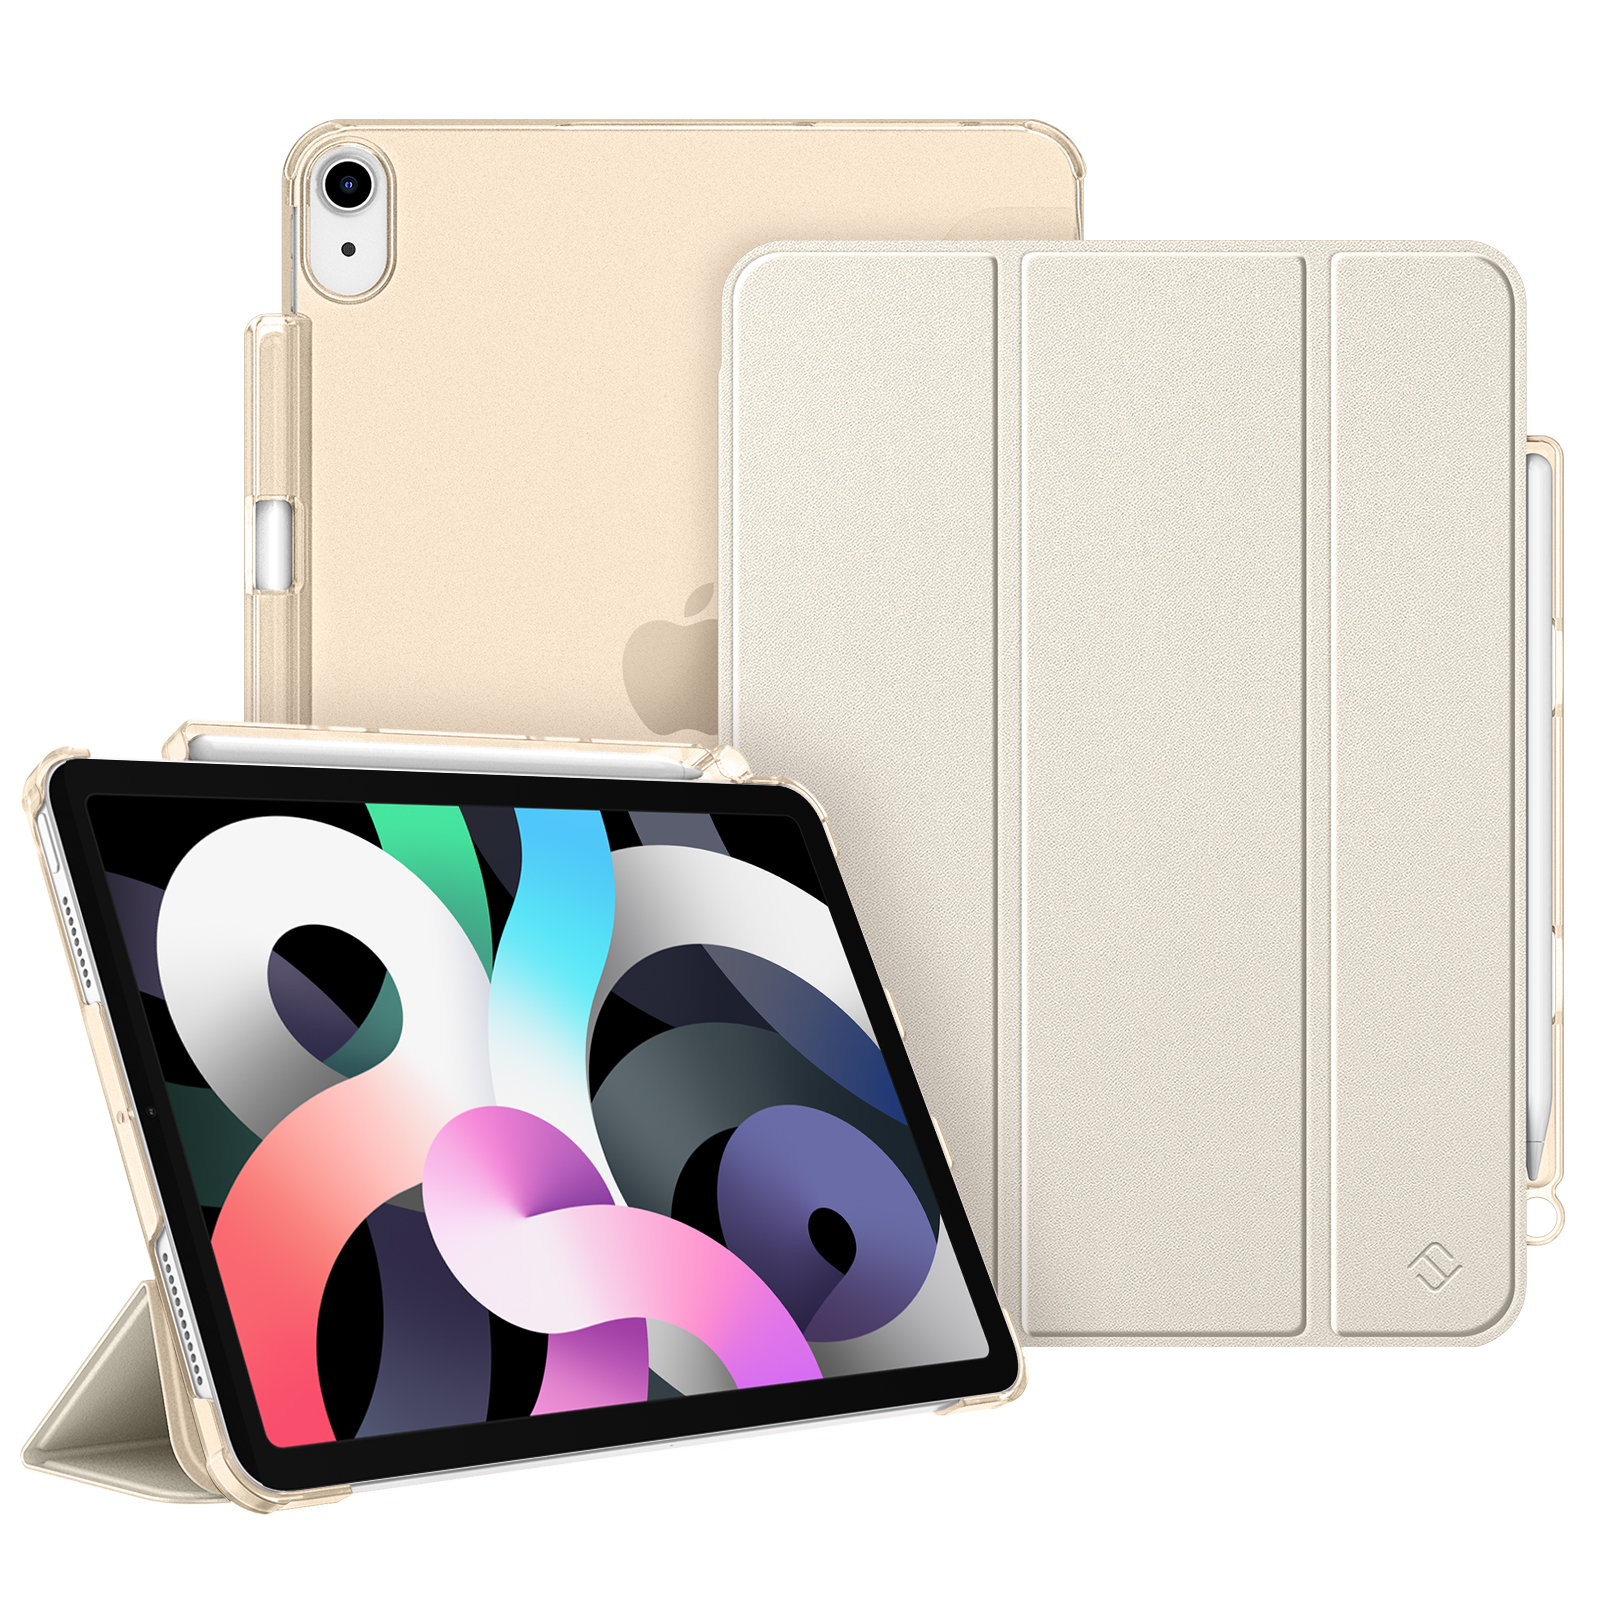 Bookcover, / 4. iPad 2020, iPad 5. Generation Air Apple, Generation 2022 Hülle, Champagner Air FINTIE